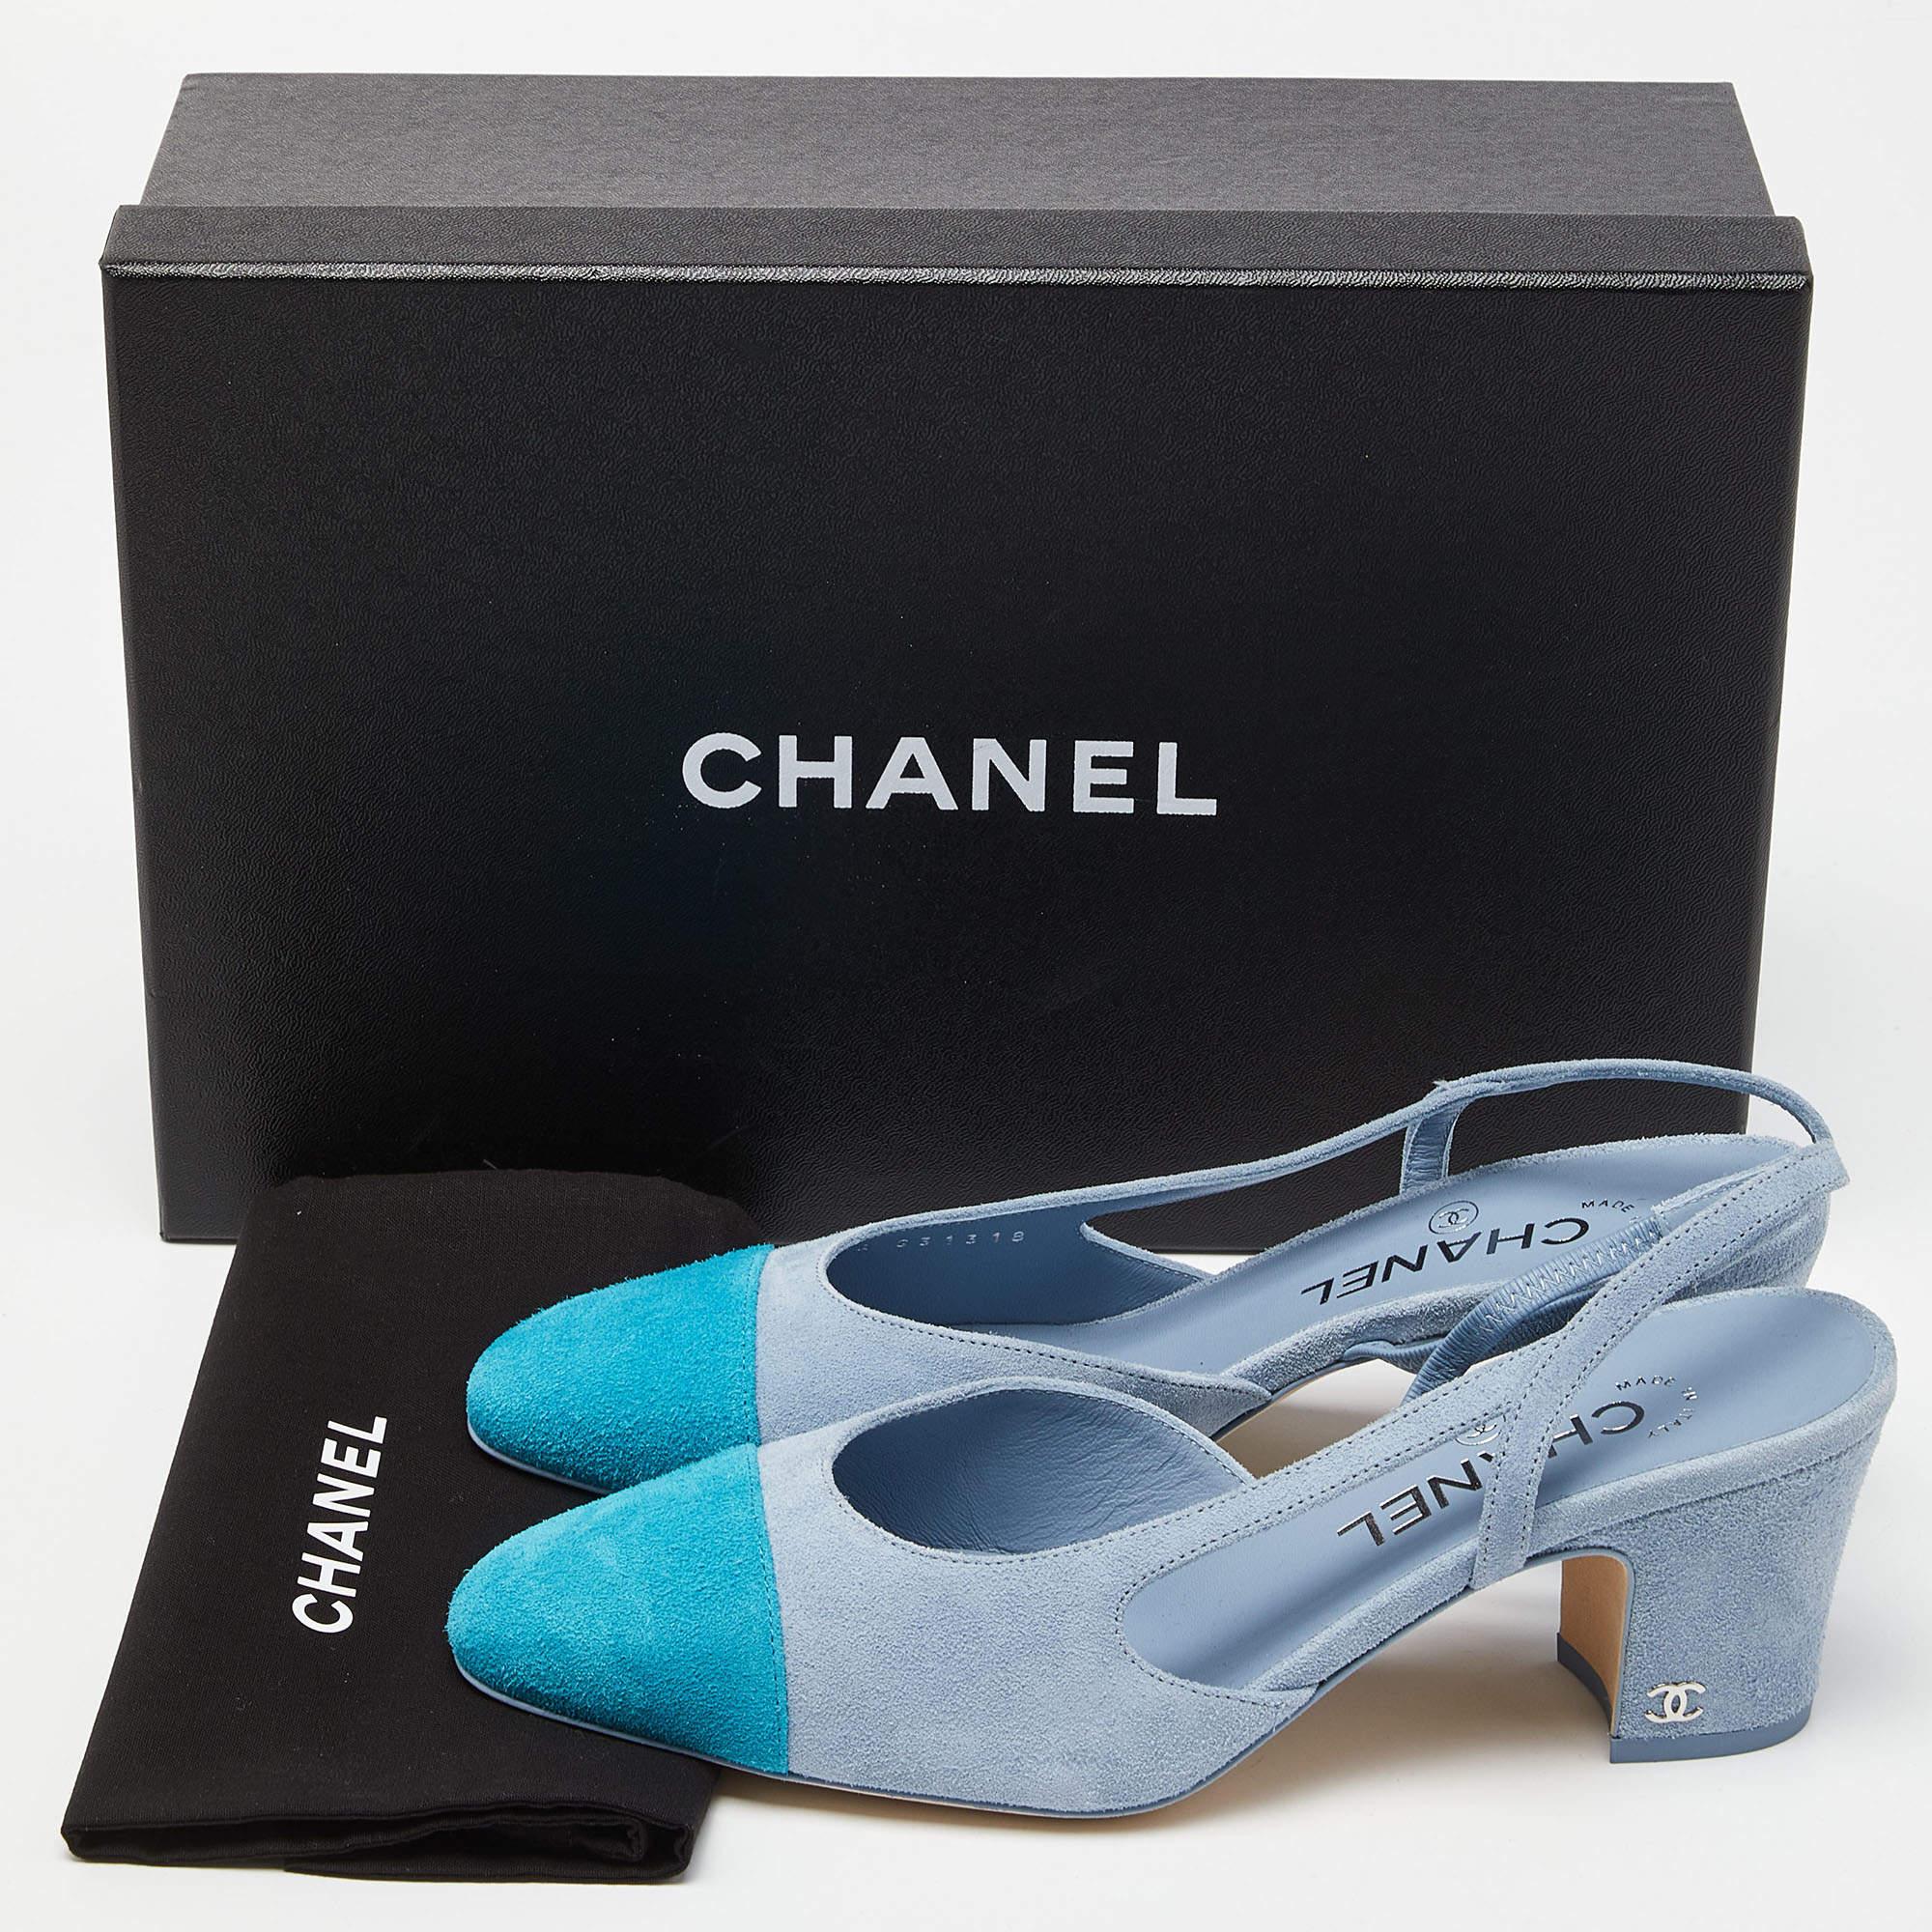 Chanel Two Tone Blue Suede Cap Toe Slingback Sandals Size 37.5 5